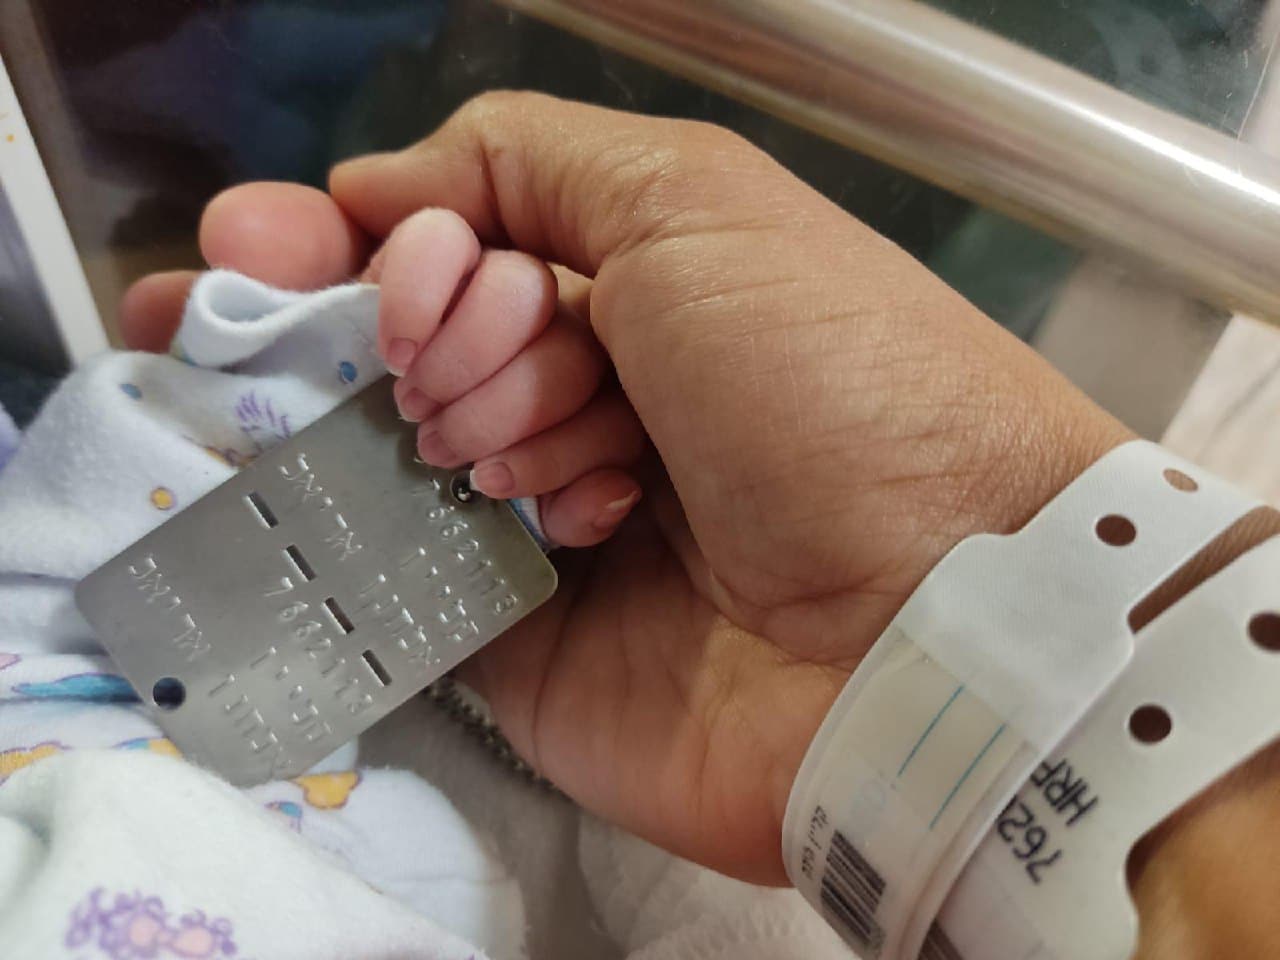 Photo of a hand with a hospital bracelet holding the hand of a newborn baby holding a Klein Elchanan Ariel soldier disk